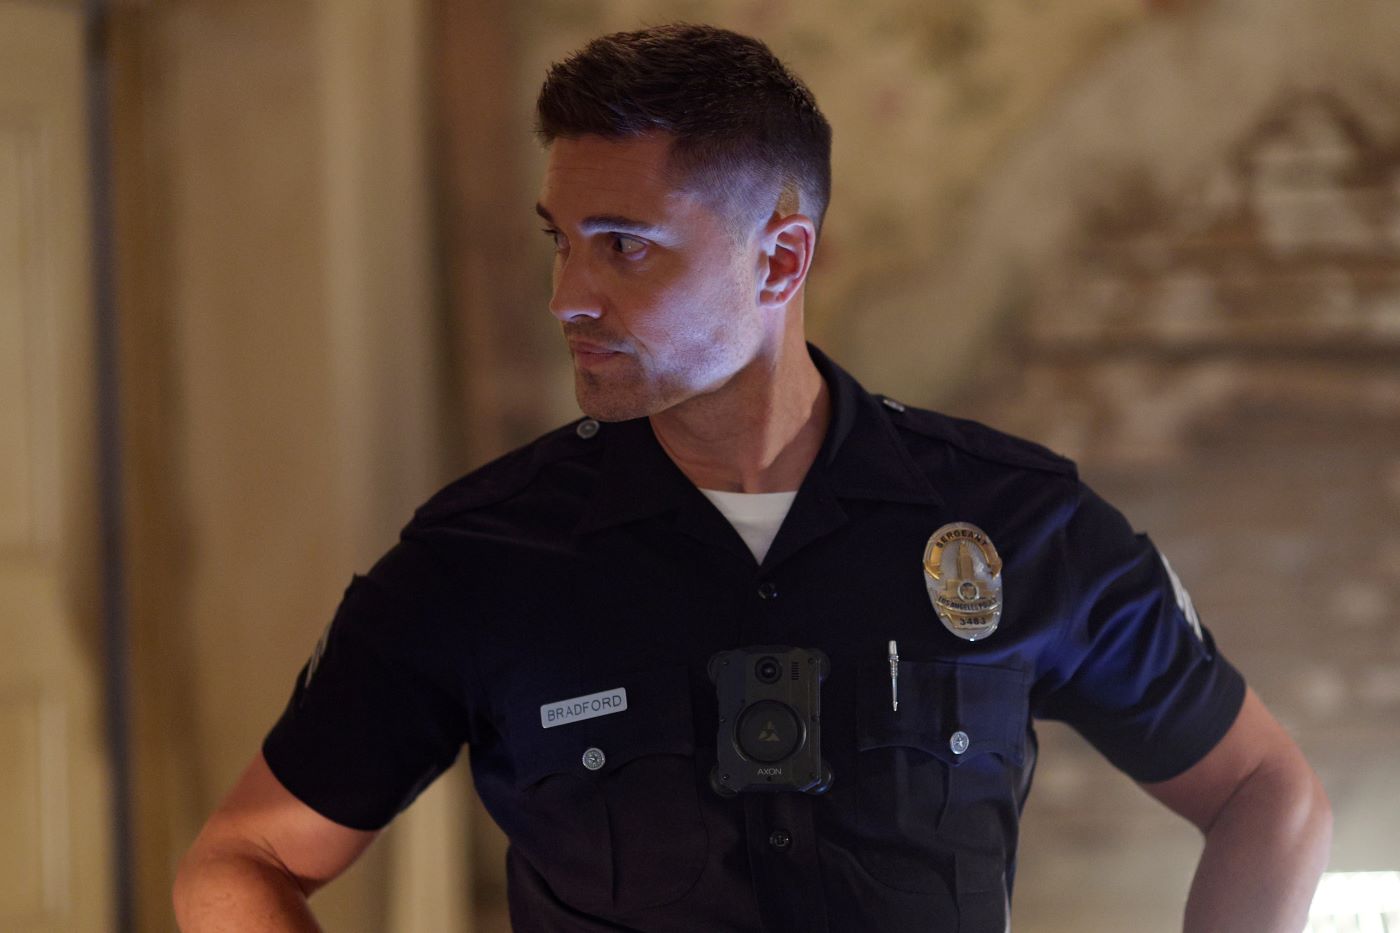 Eric Winter, in character as Tim Bradford in 'The Rookie,' which ABC has yet to renew for season 6, wears his dark blue police uniform.